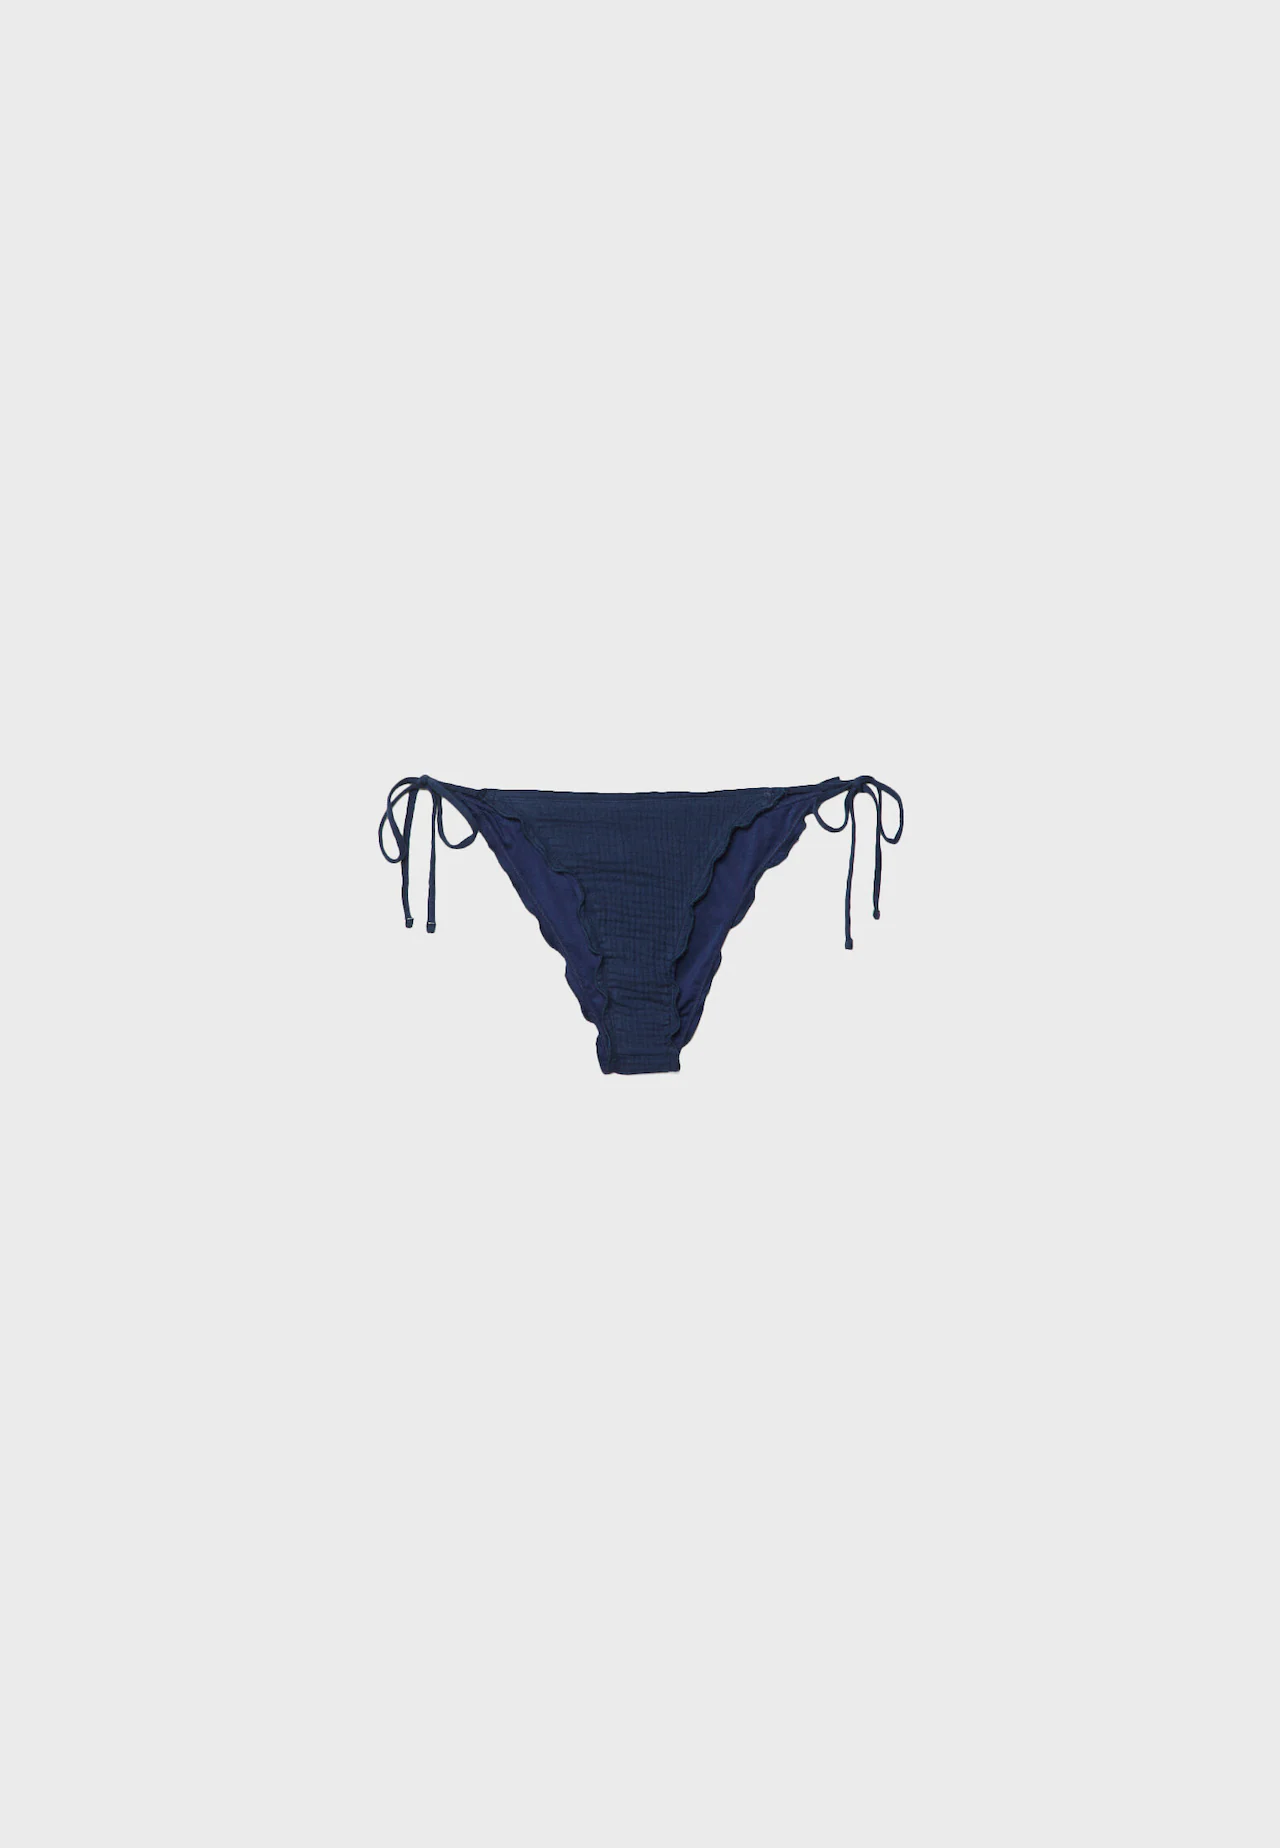 Midi knickers in navy blue Invisible Elegance